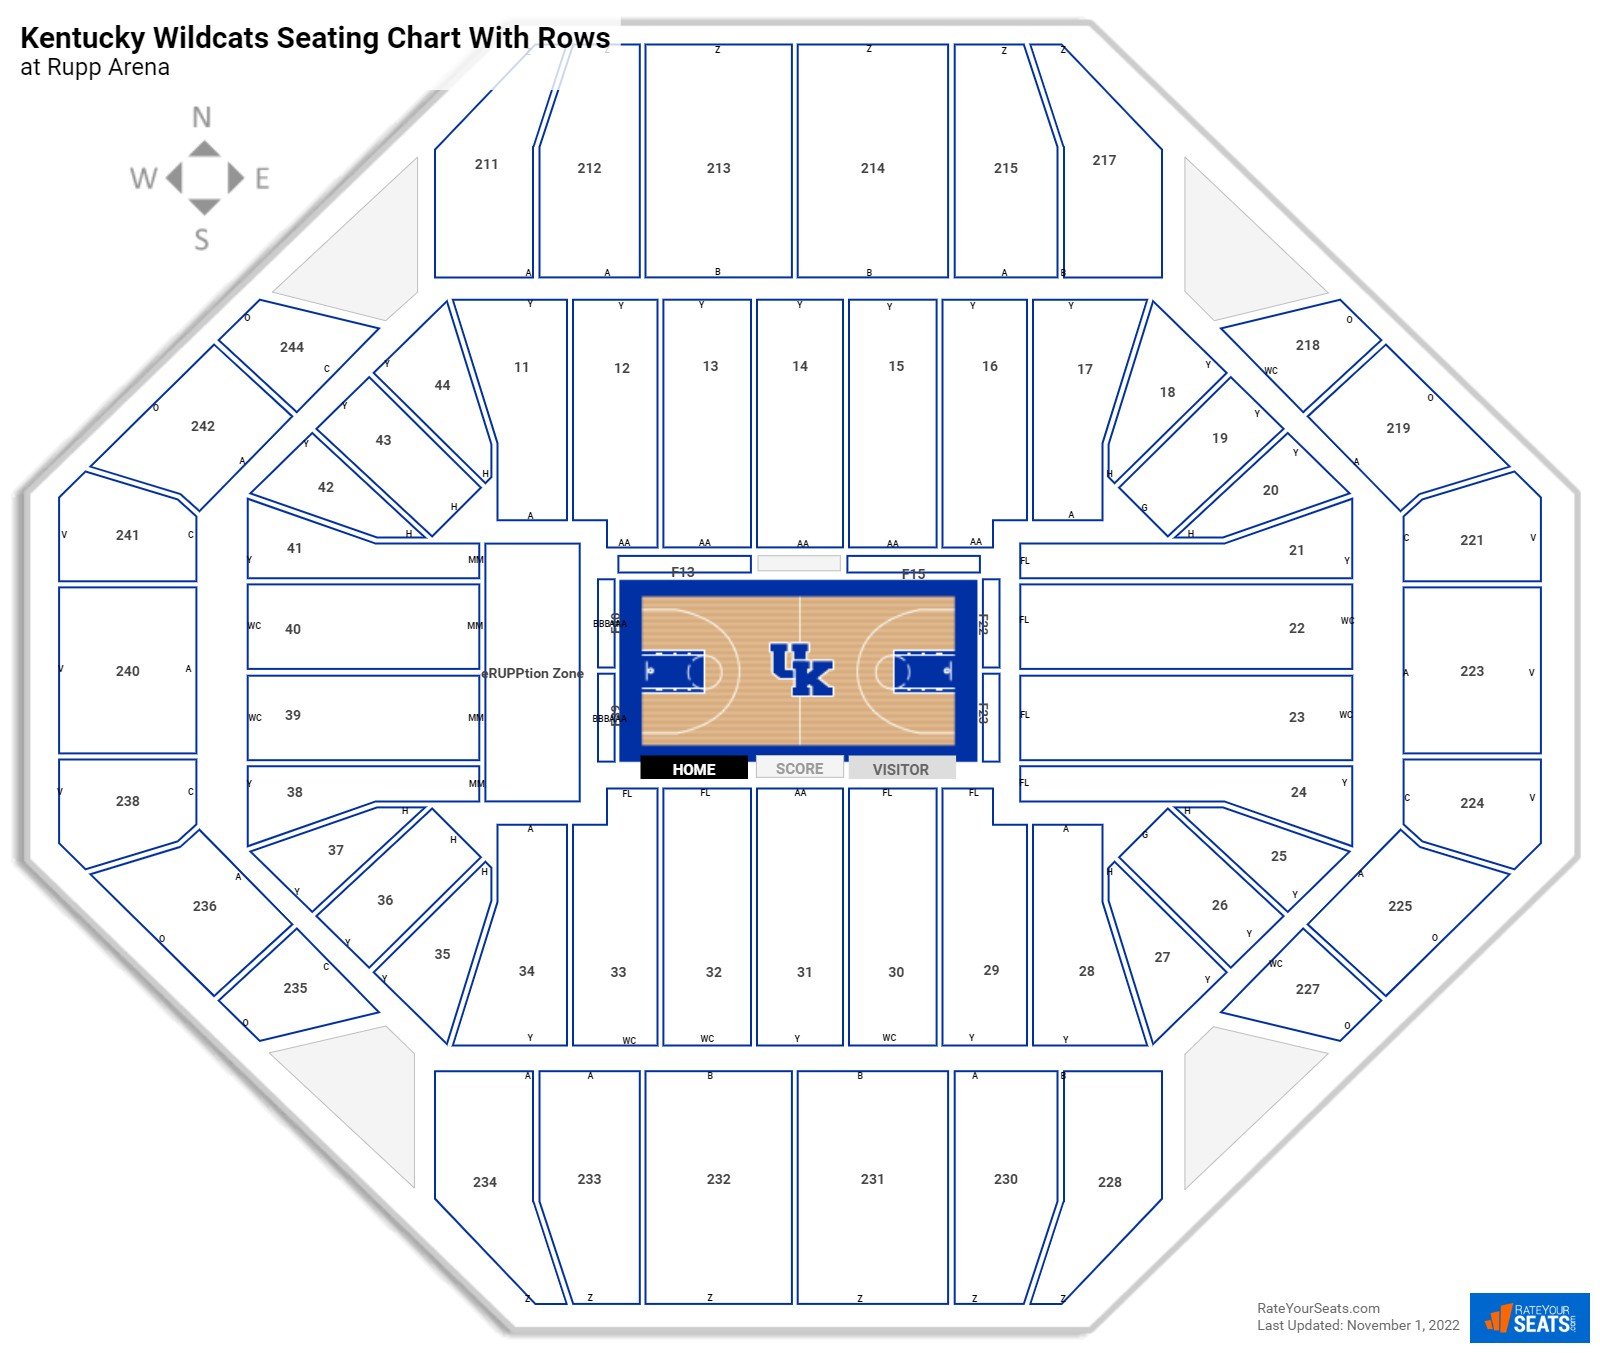 Rupp Arena seating chart with row numbers